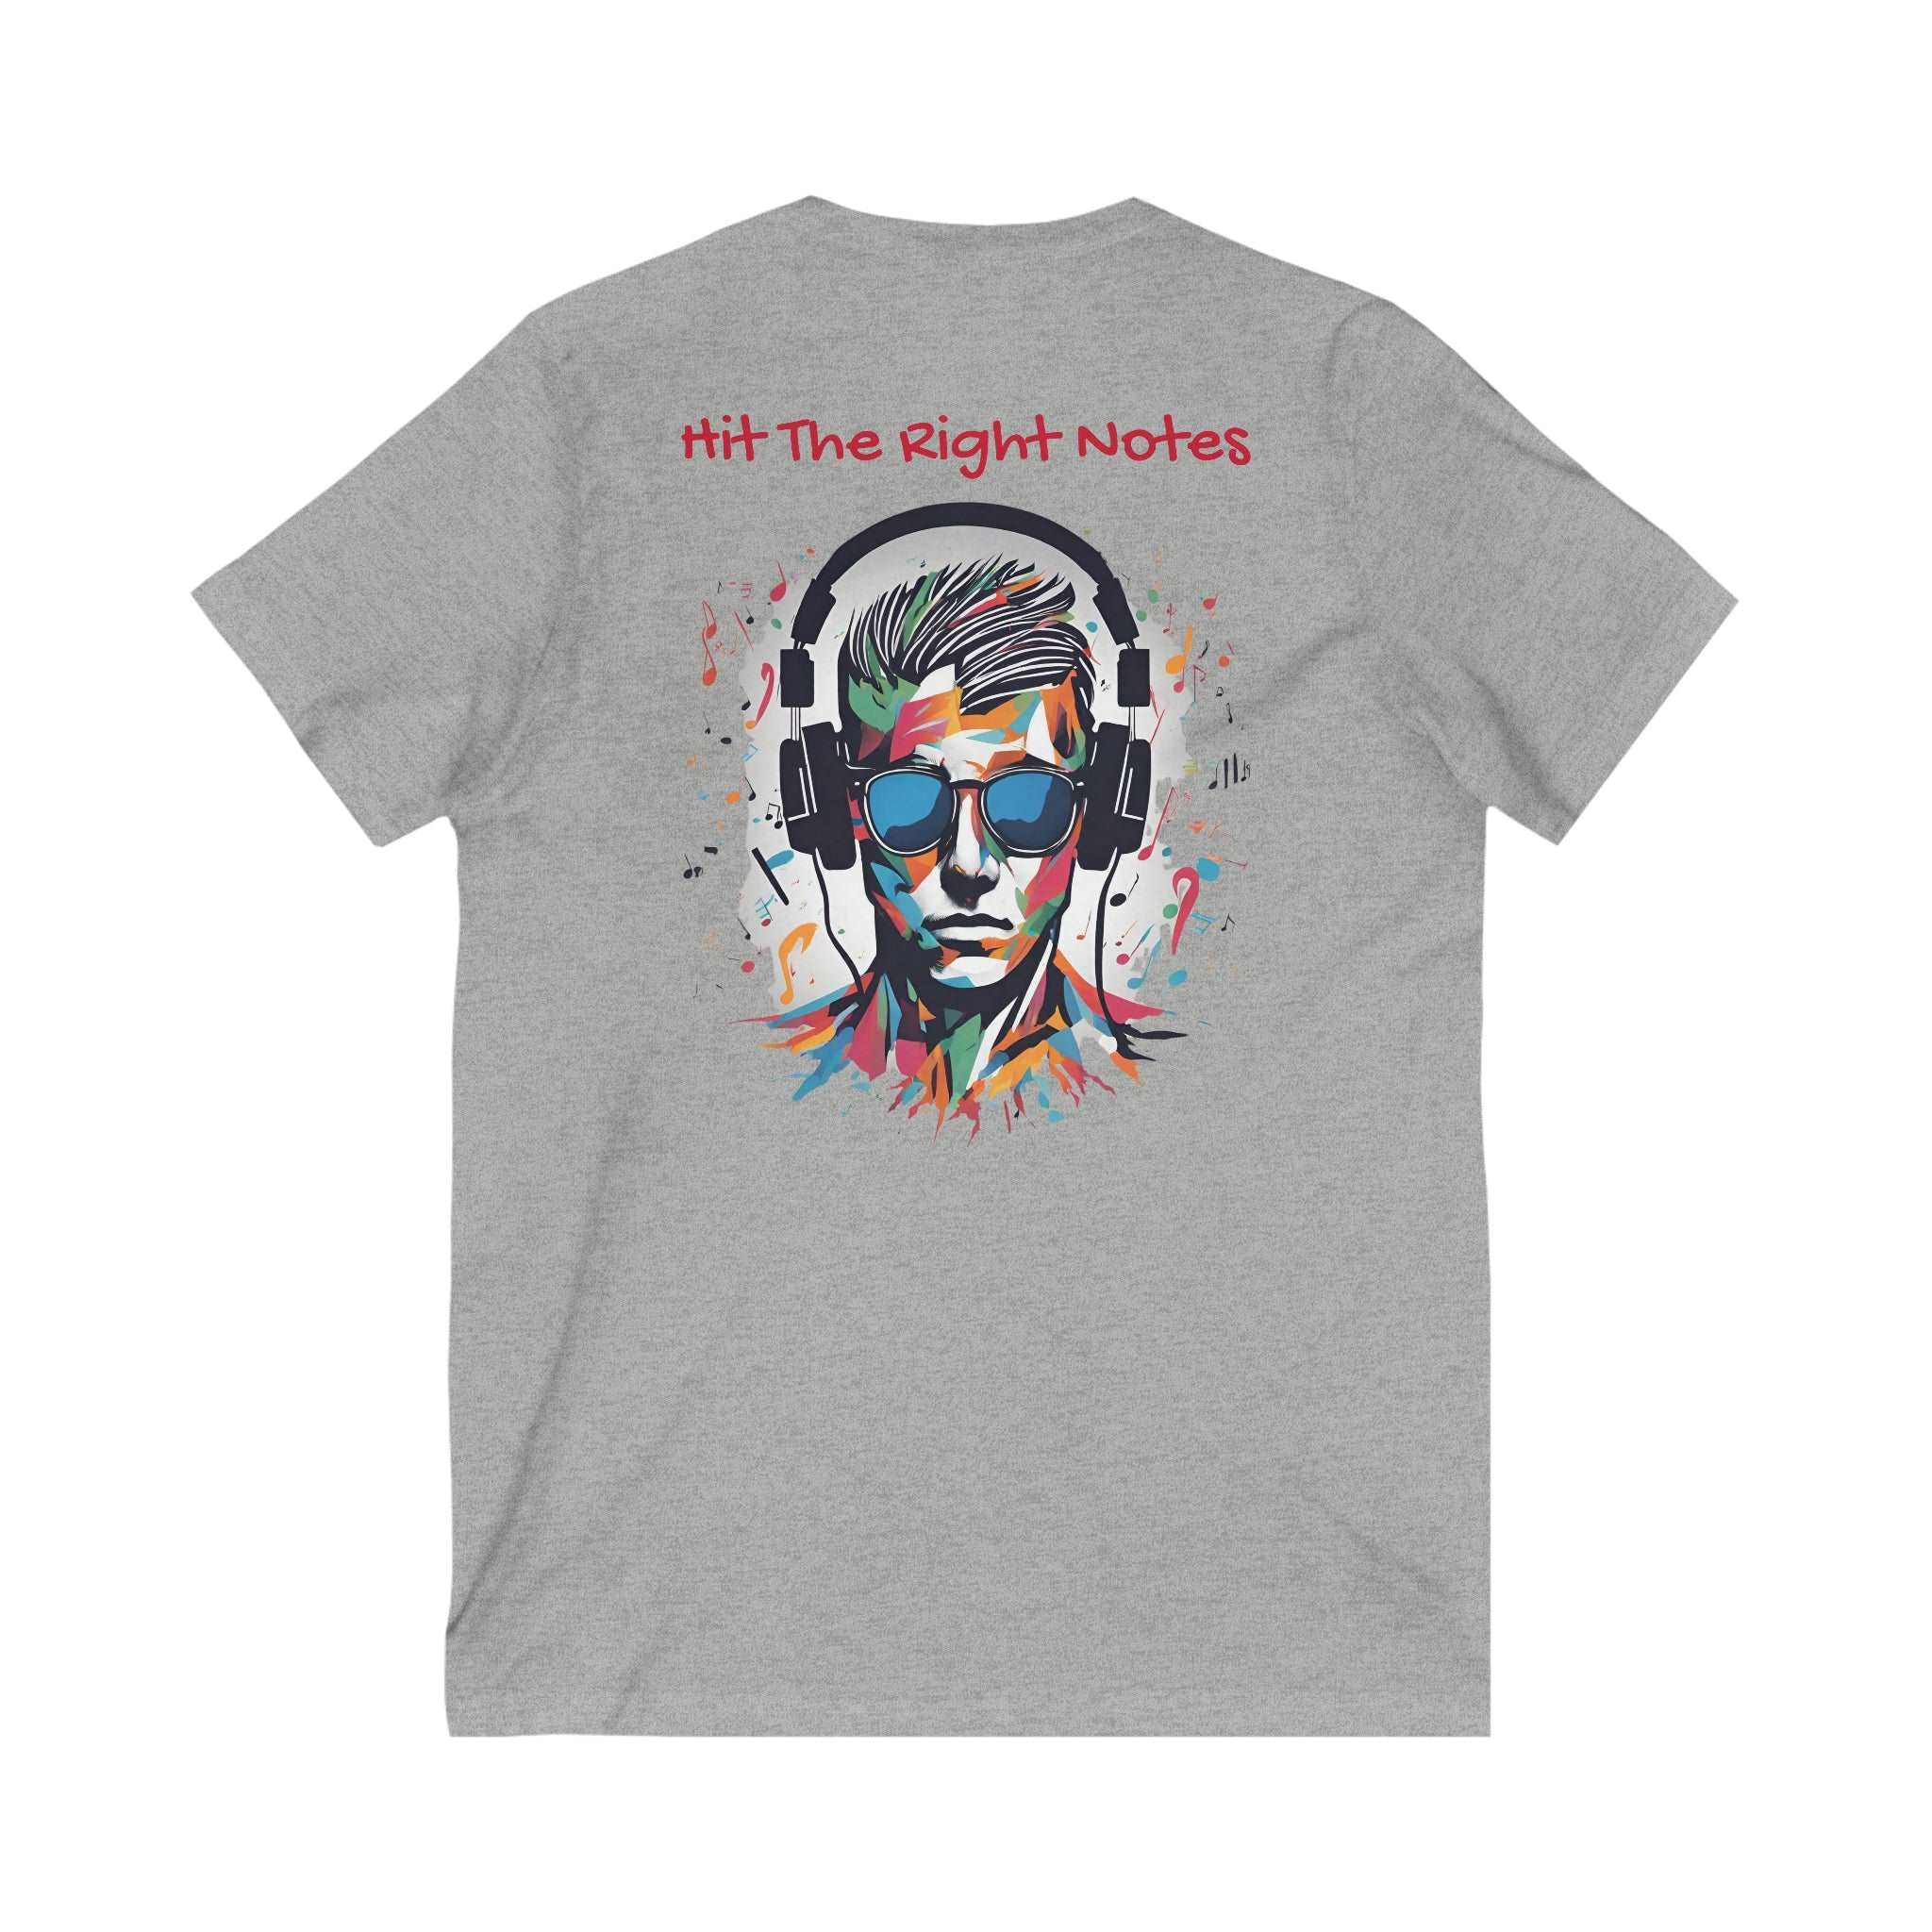 Hit The Right Notes Tee: Start conversations now! Athletic Heather Basic T-Shirt Casual Shirt Classic Tee Comfortable Tee Cotton T-Shirt Everyday Wear Graphic Tee Statement Shirt T-shirt Tee Collection Tee for all Tee for Men Tee for Women Unisex Apparel Vintage Tee V-neck 10778119899413142374_2048_c85d9e4e-24a5-4ea3-8a71-3bcbc0d44543 Printify